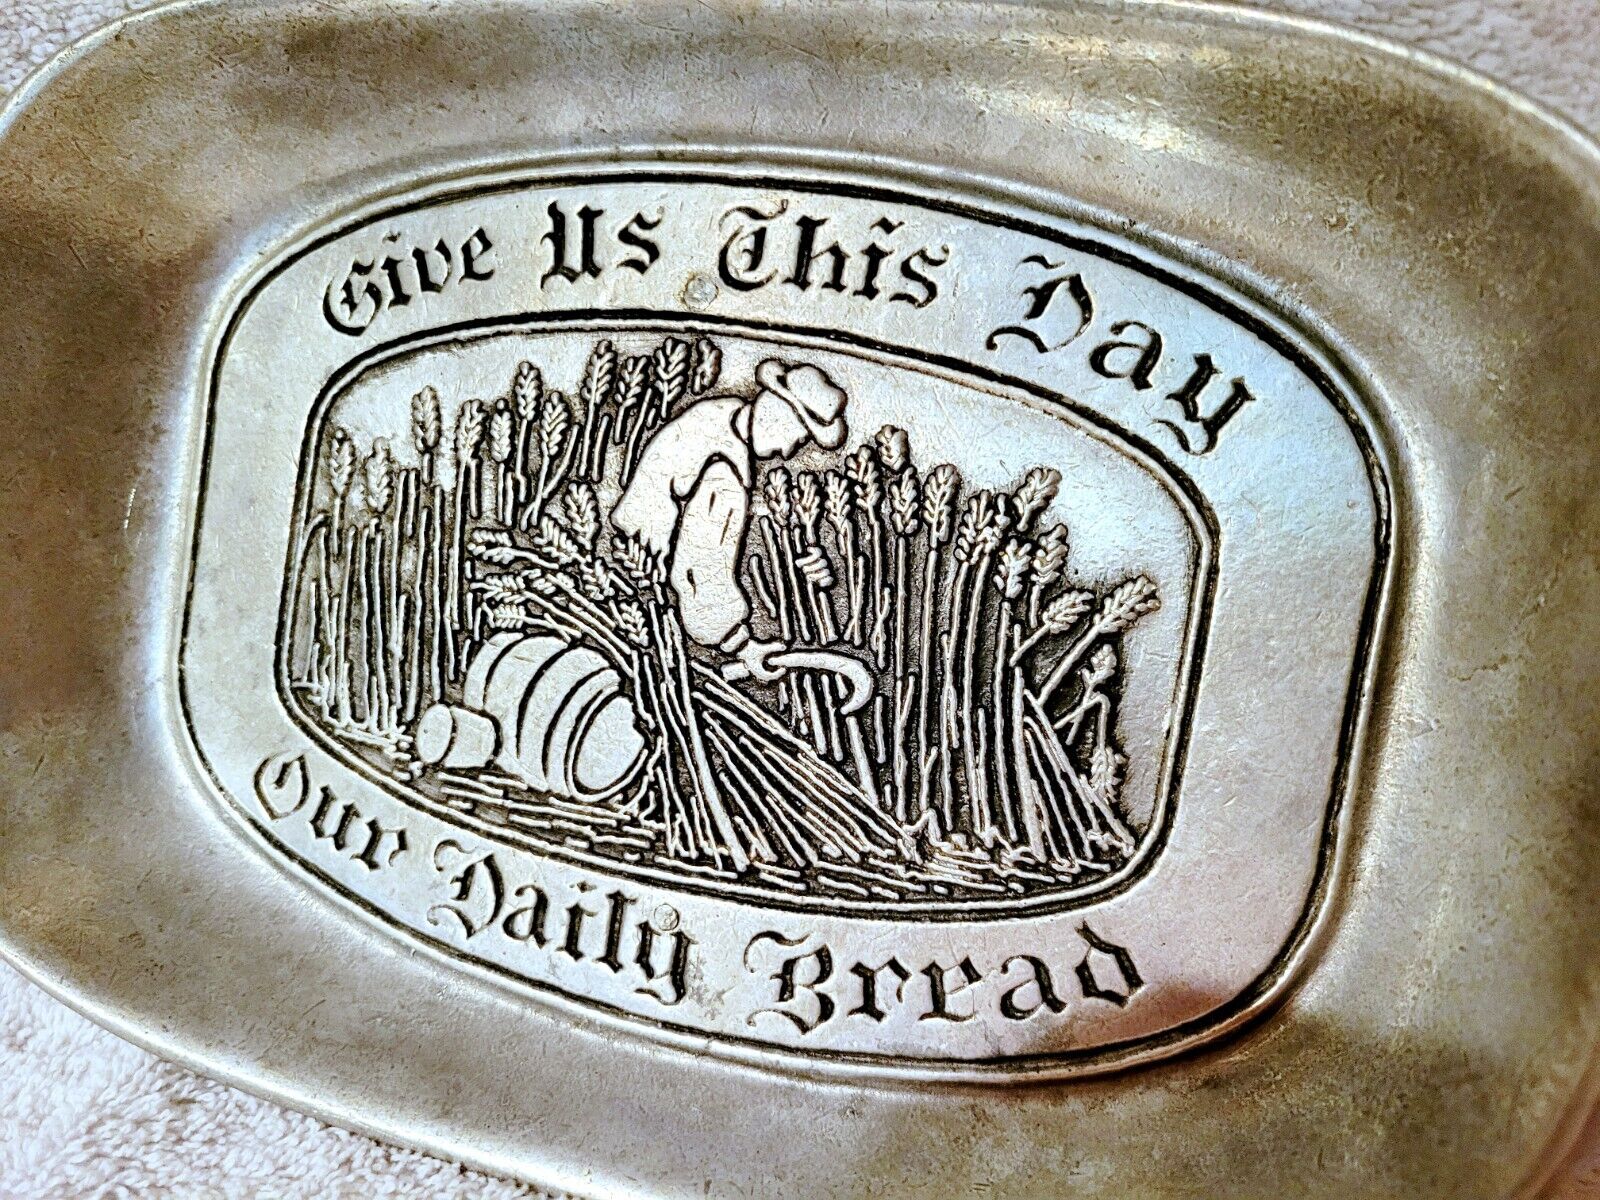 Wilton Armetale Religious Pewter Tray Dish Give Us This Day Our Daily Bread 6x9